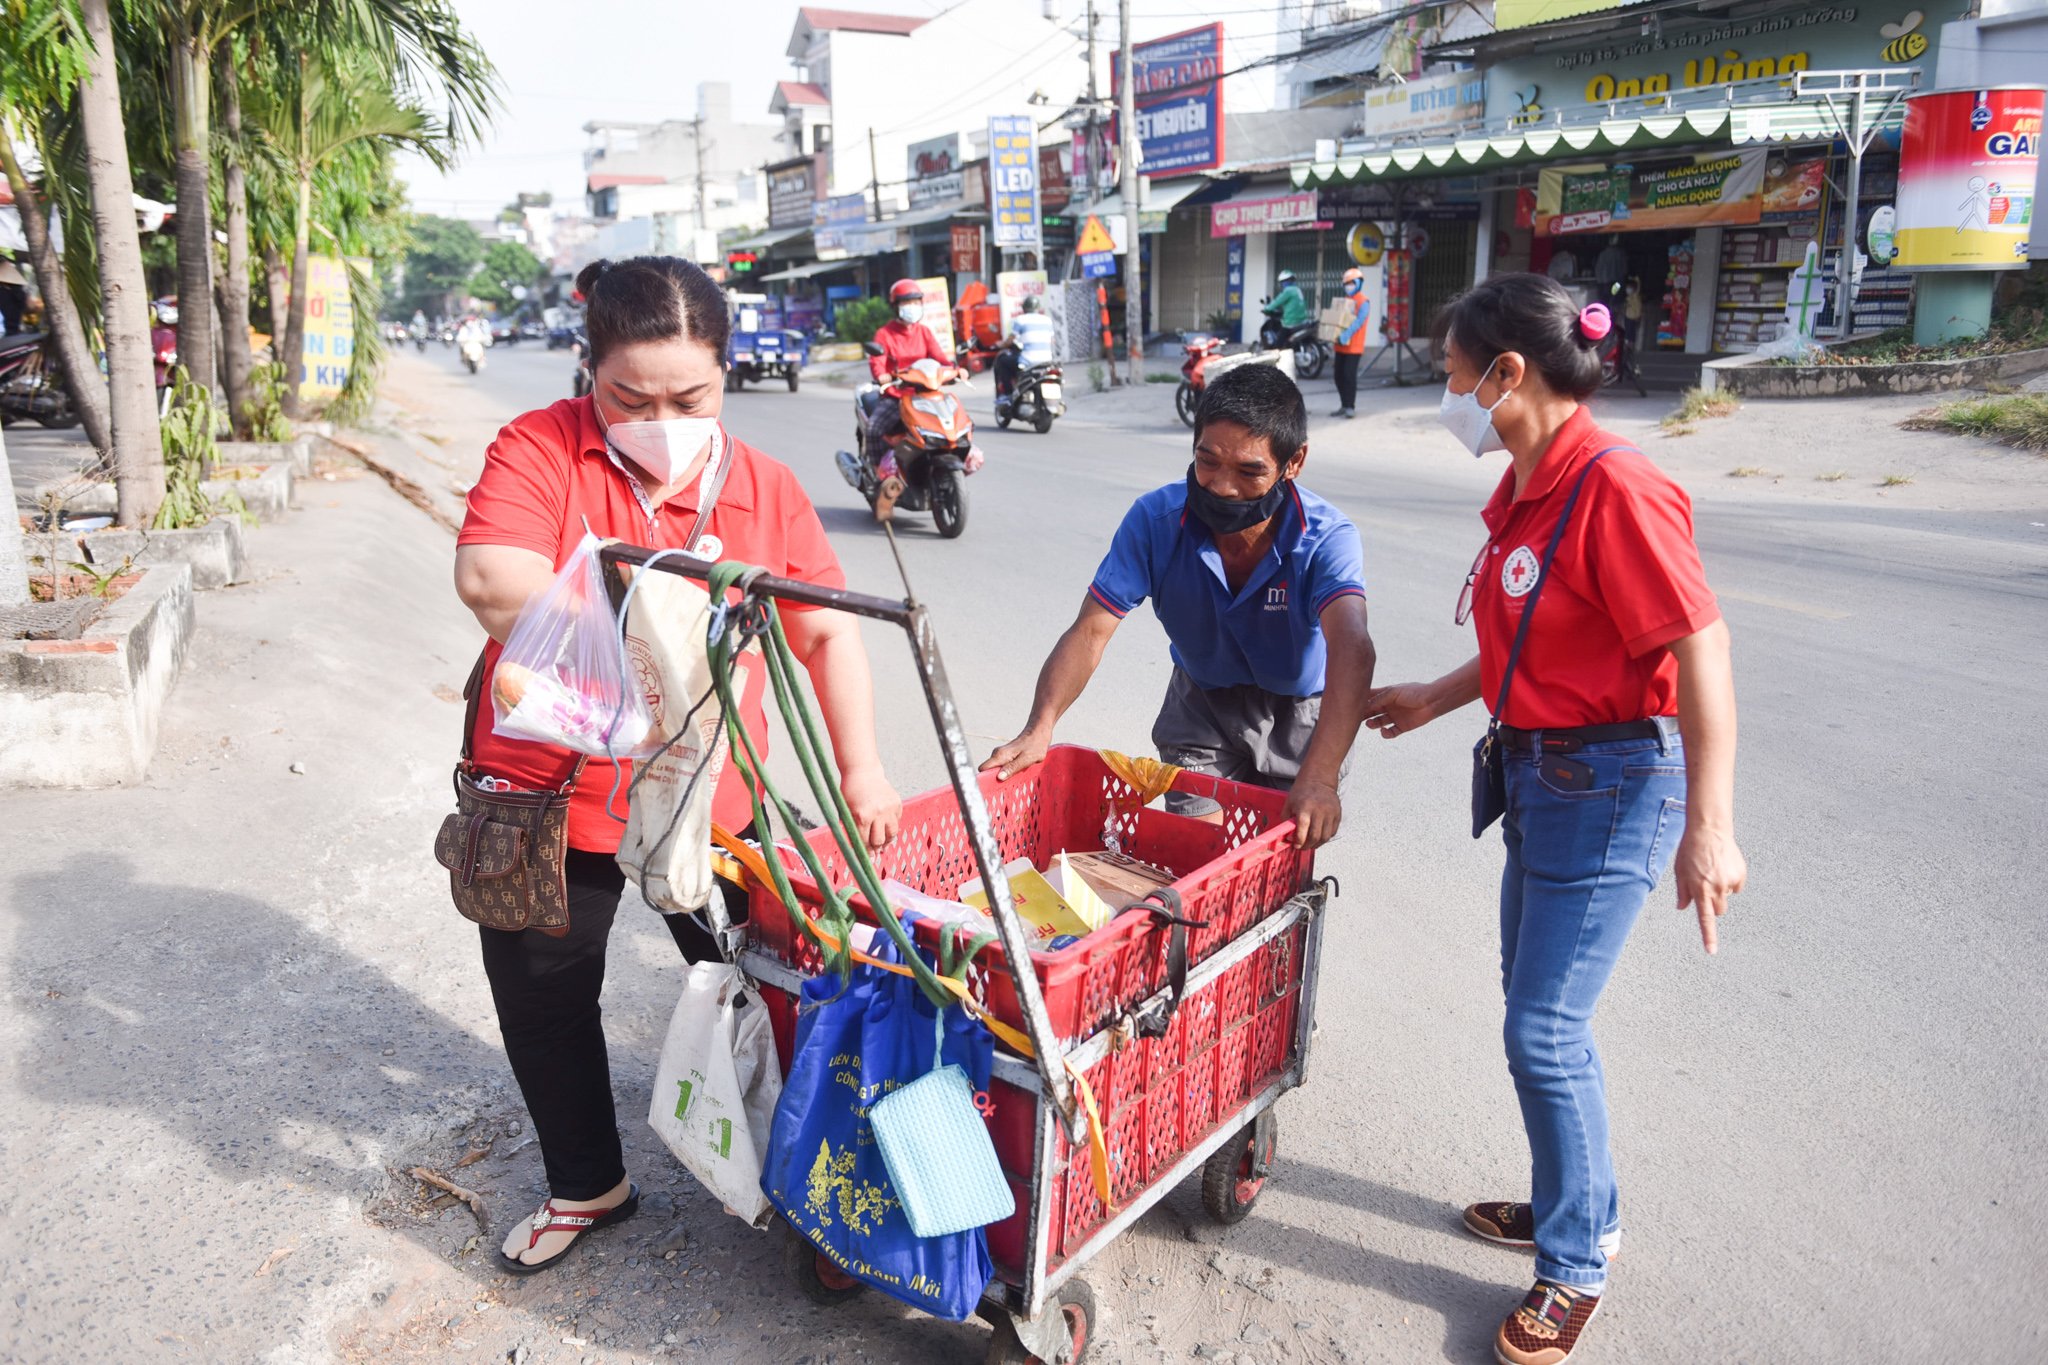 A man gives recyclable materials in exchange for rice in Tang Nhon Phu A Ward, Thu Duc City, Ho Chi Minh City, March 20, 2022. Photo: Ngoc Phuong / Tuoi Tre